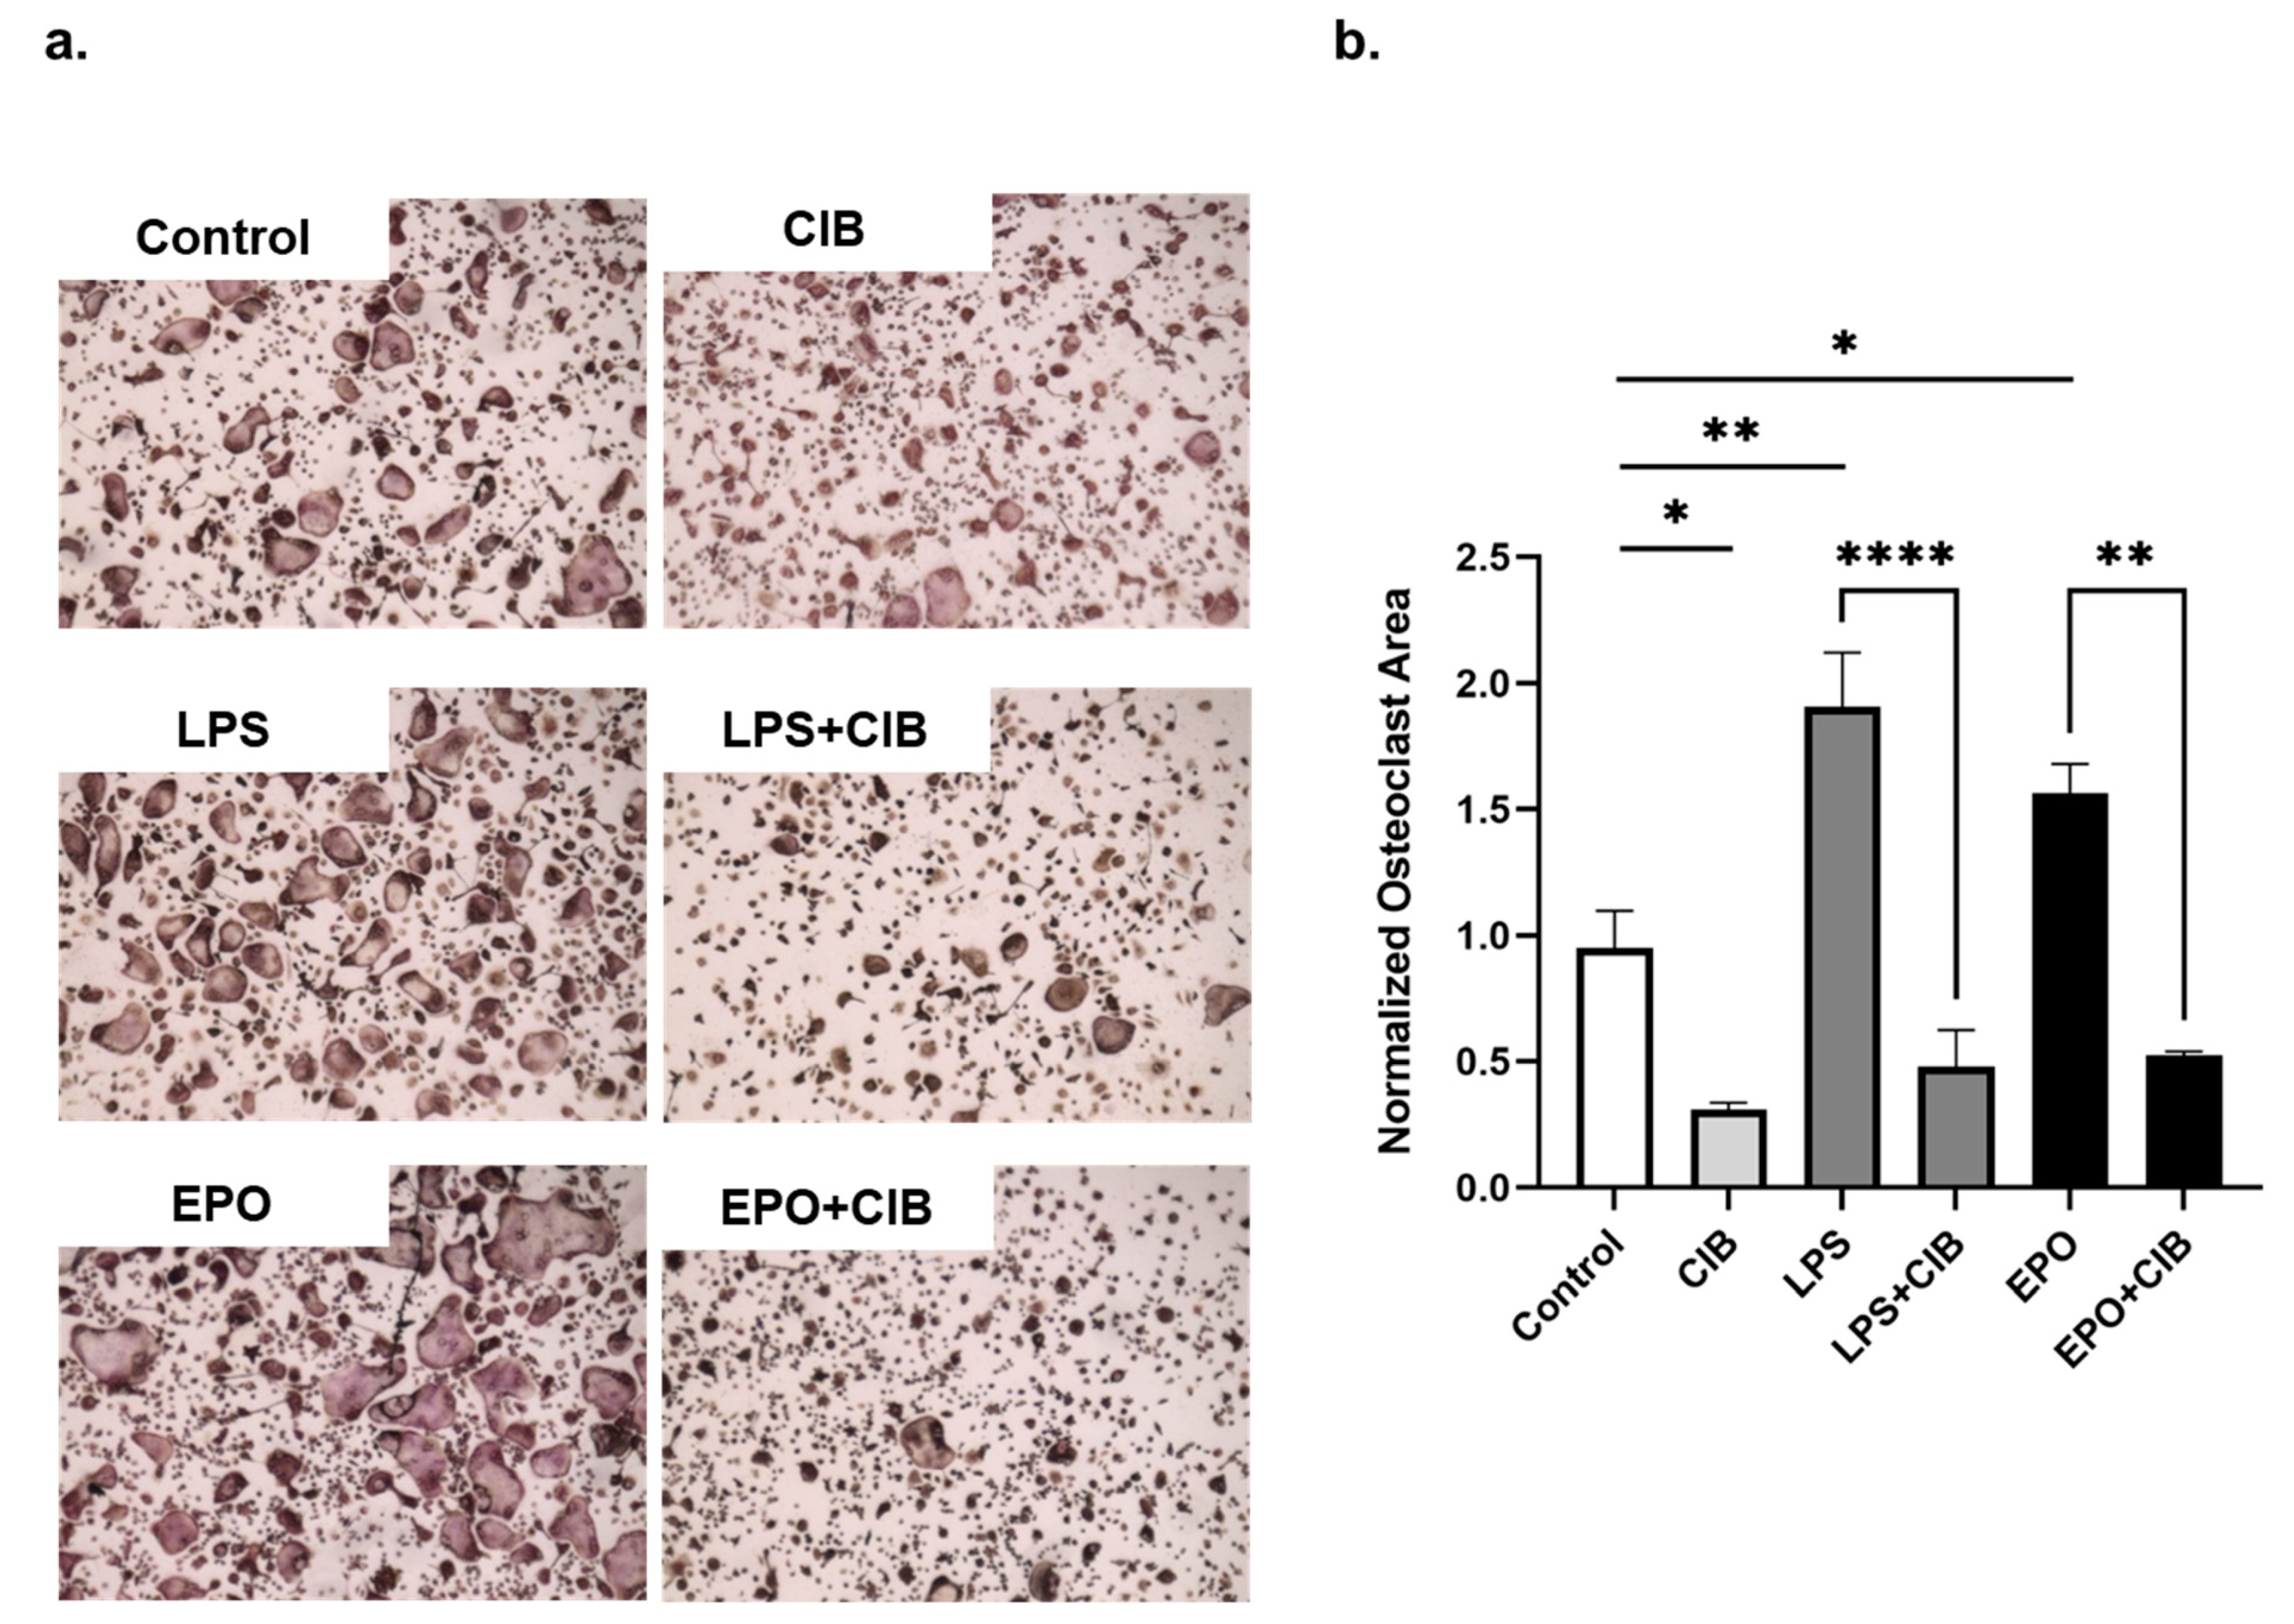 IJMS | Free Full-Text | The Non-Erythropoietic EPO Analogue Cibinetide  Inhibits Osteoclastogenesis In Vitro and Increases Bone Mineral Density in  Mice